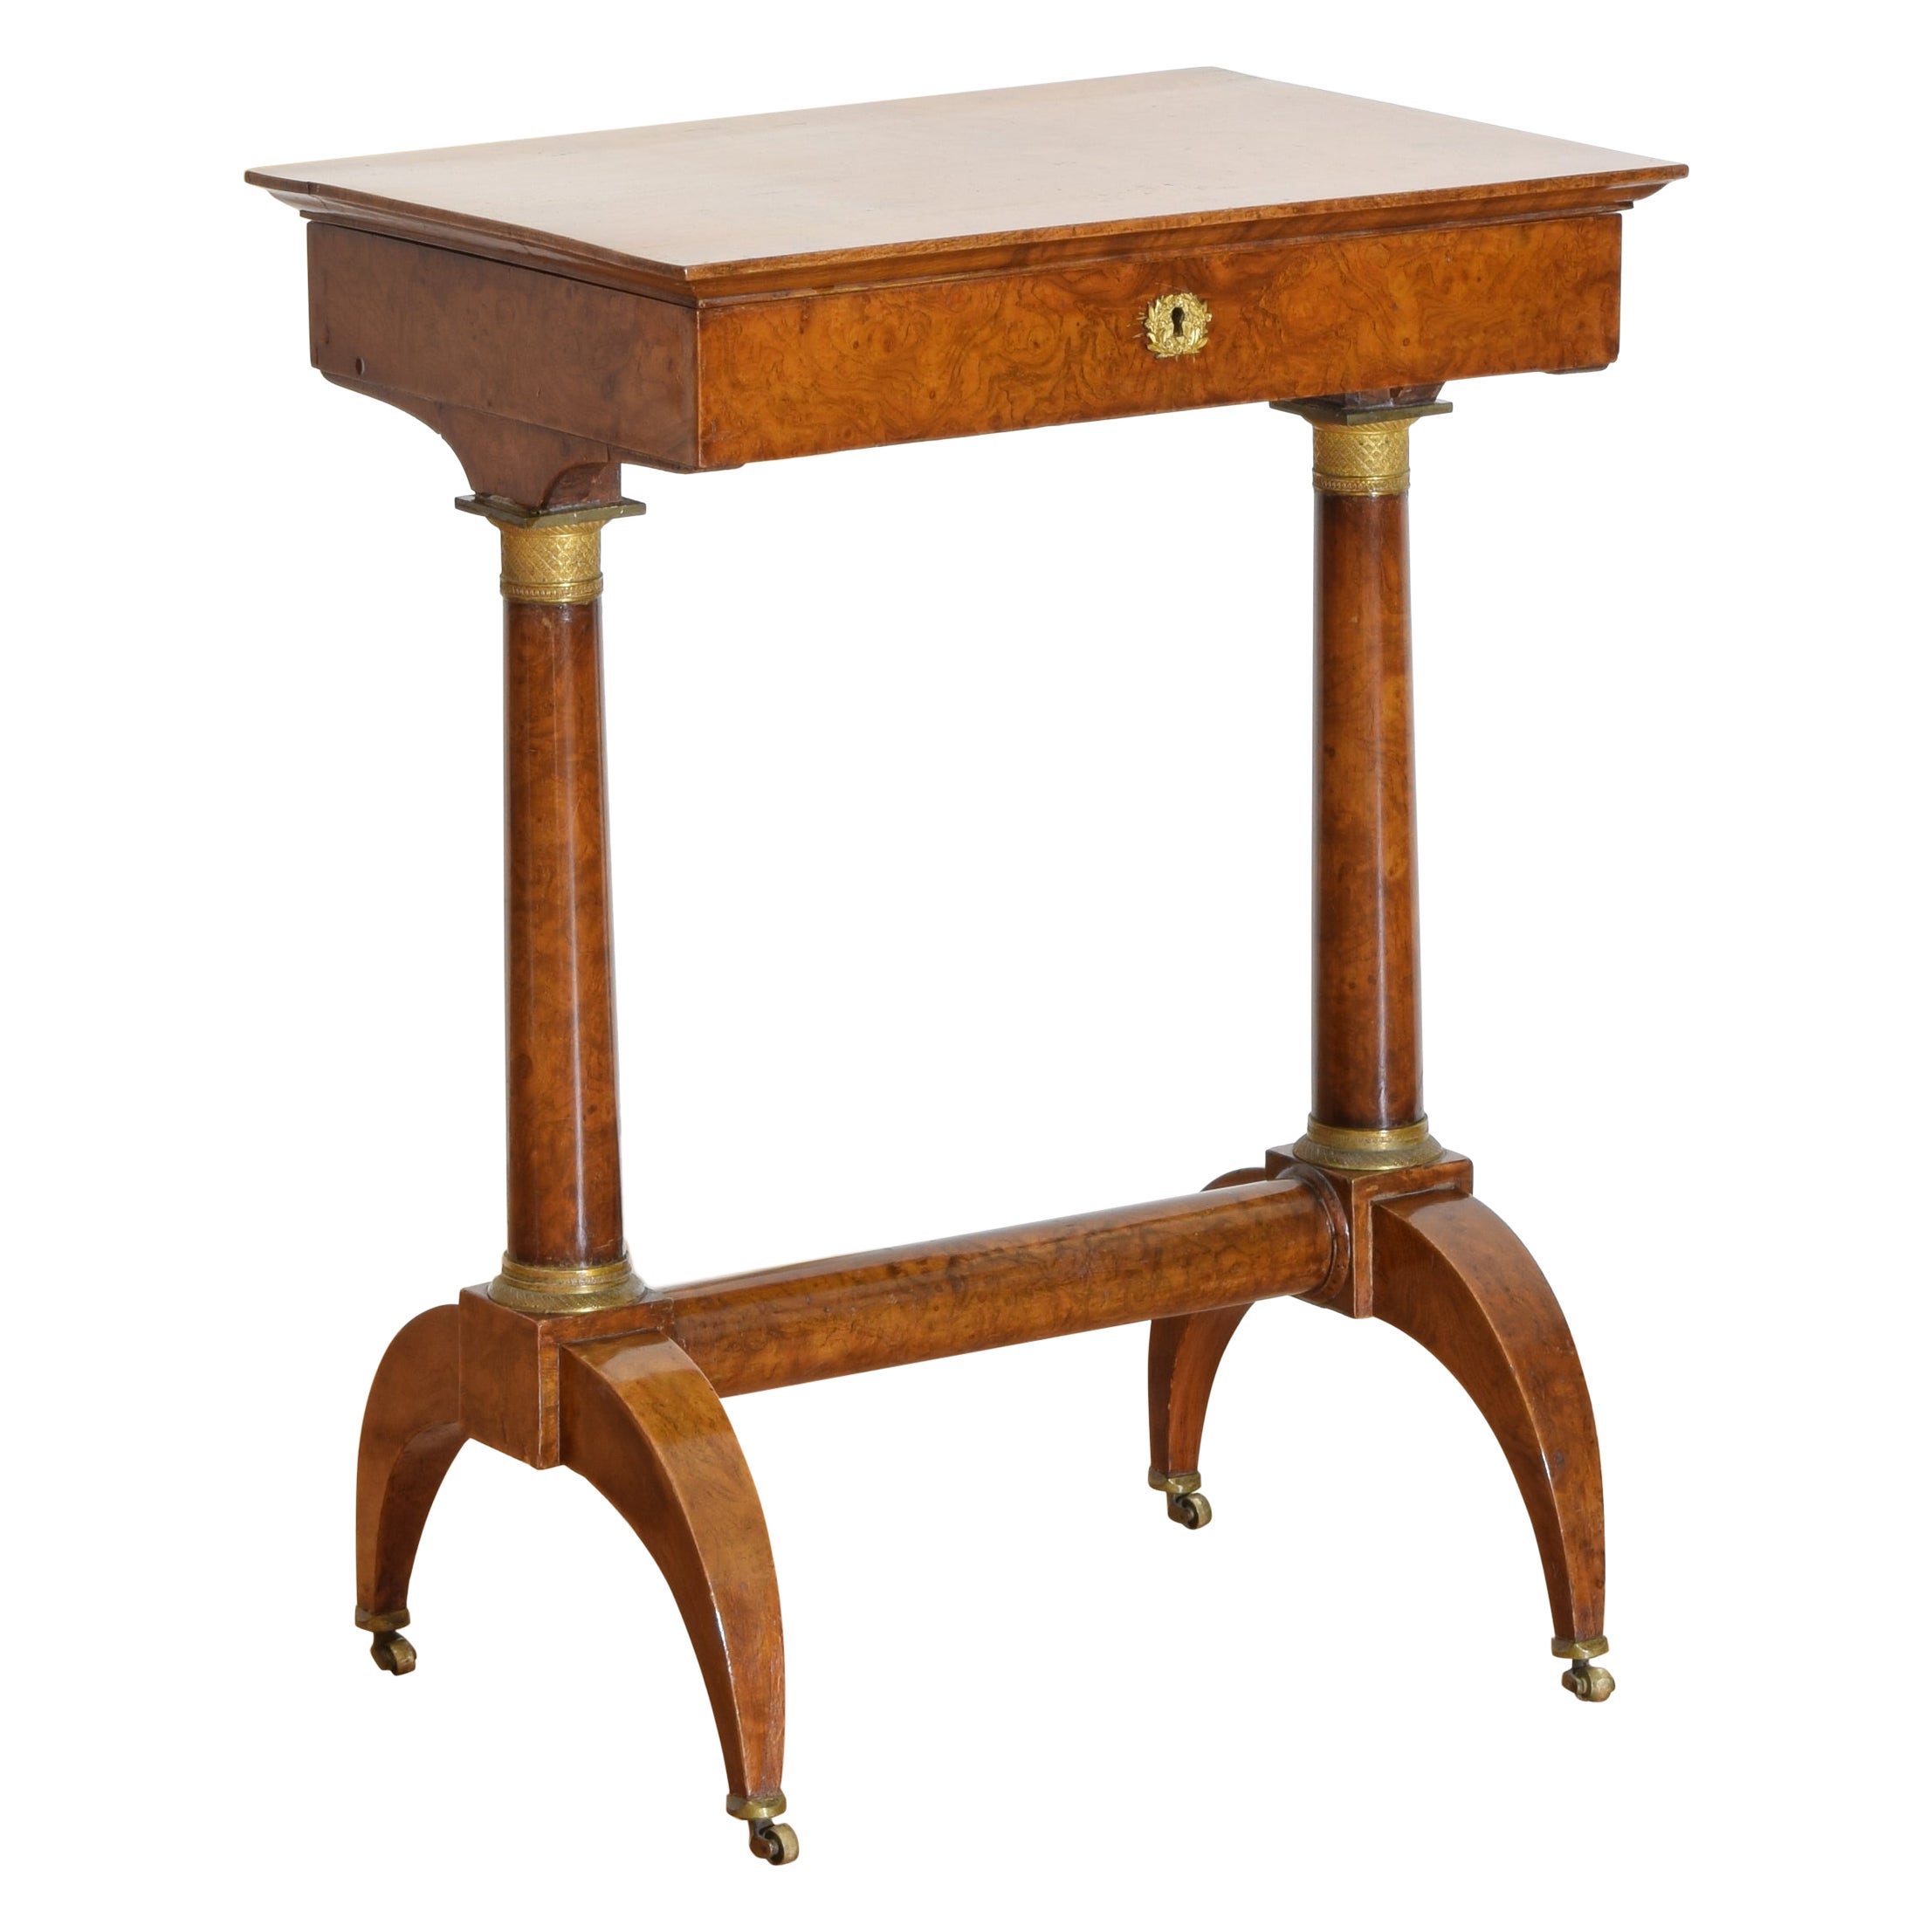 French Empire Burl Walnut Veneer & Brass Hinged Top Vanity/End Table, 1stq 19c For Sale